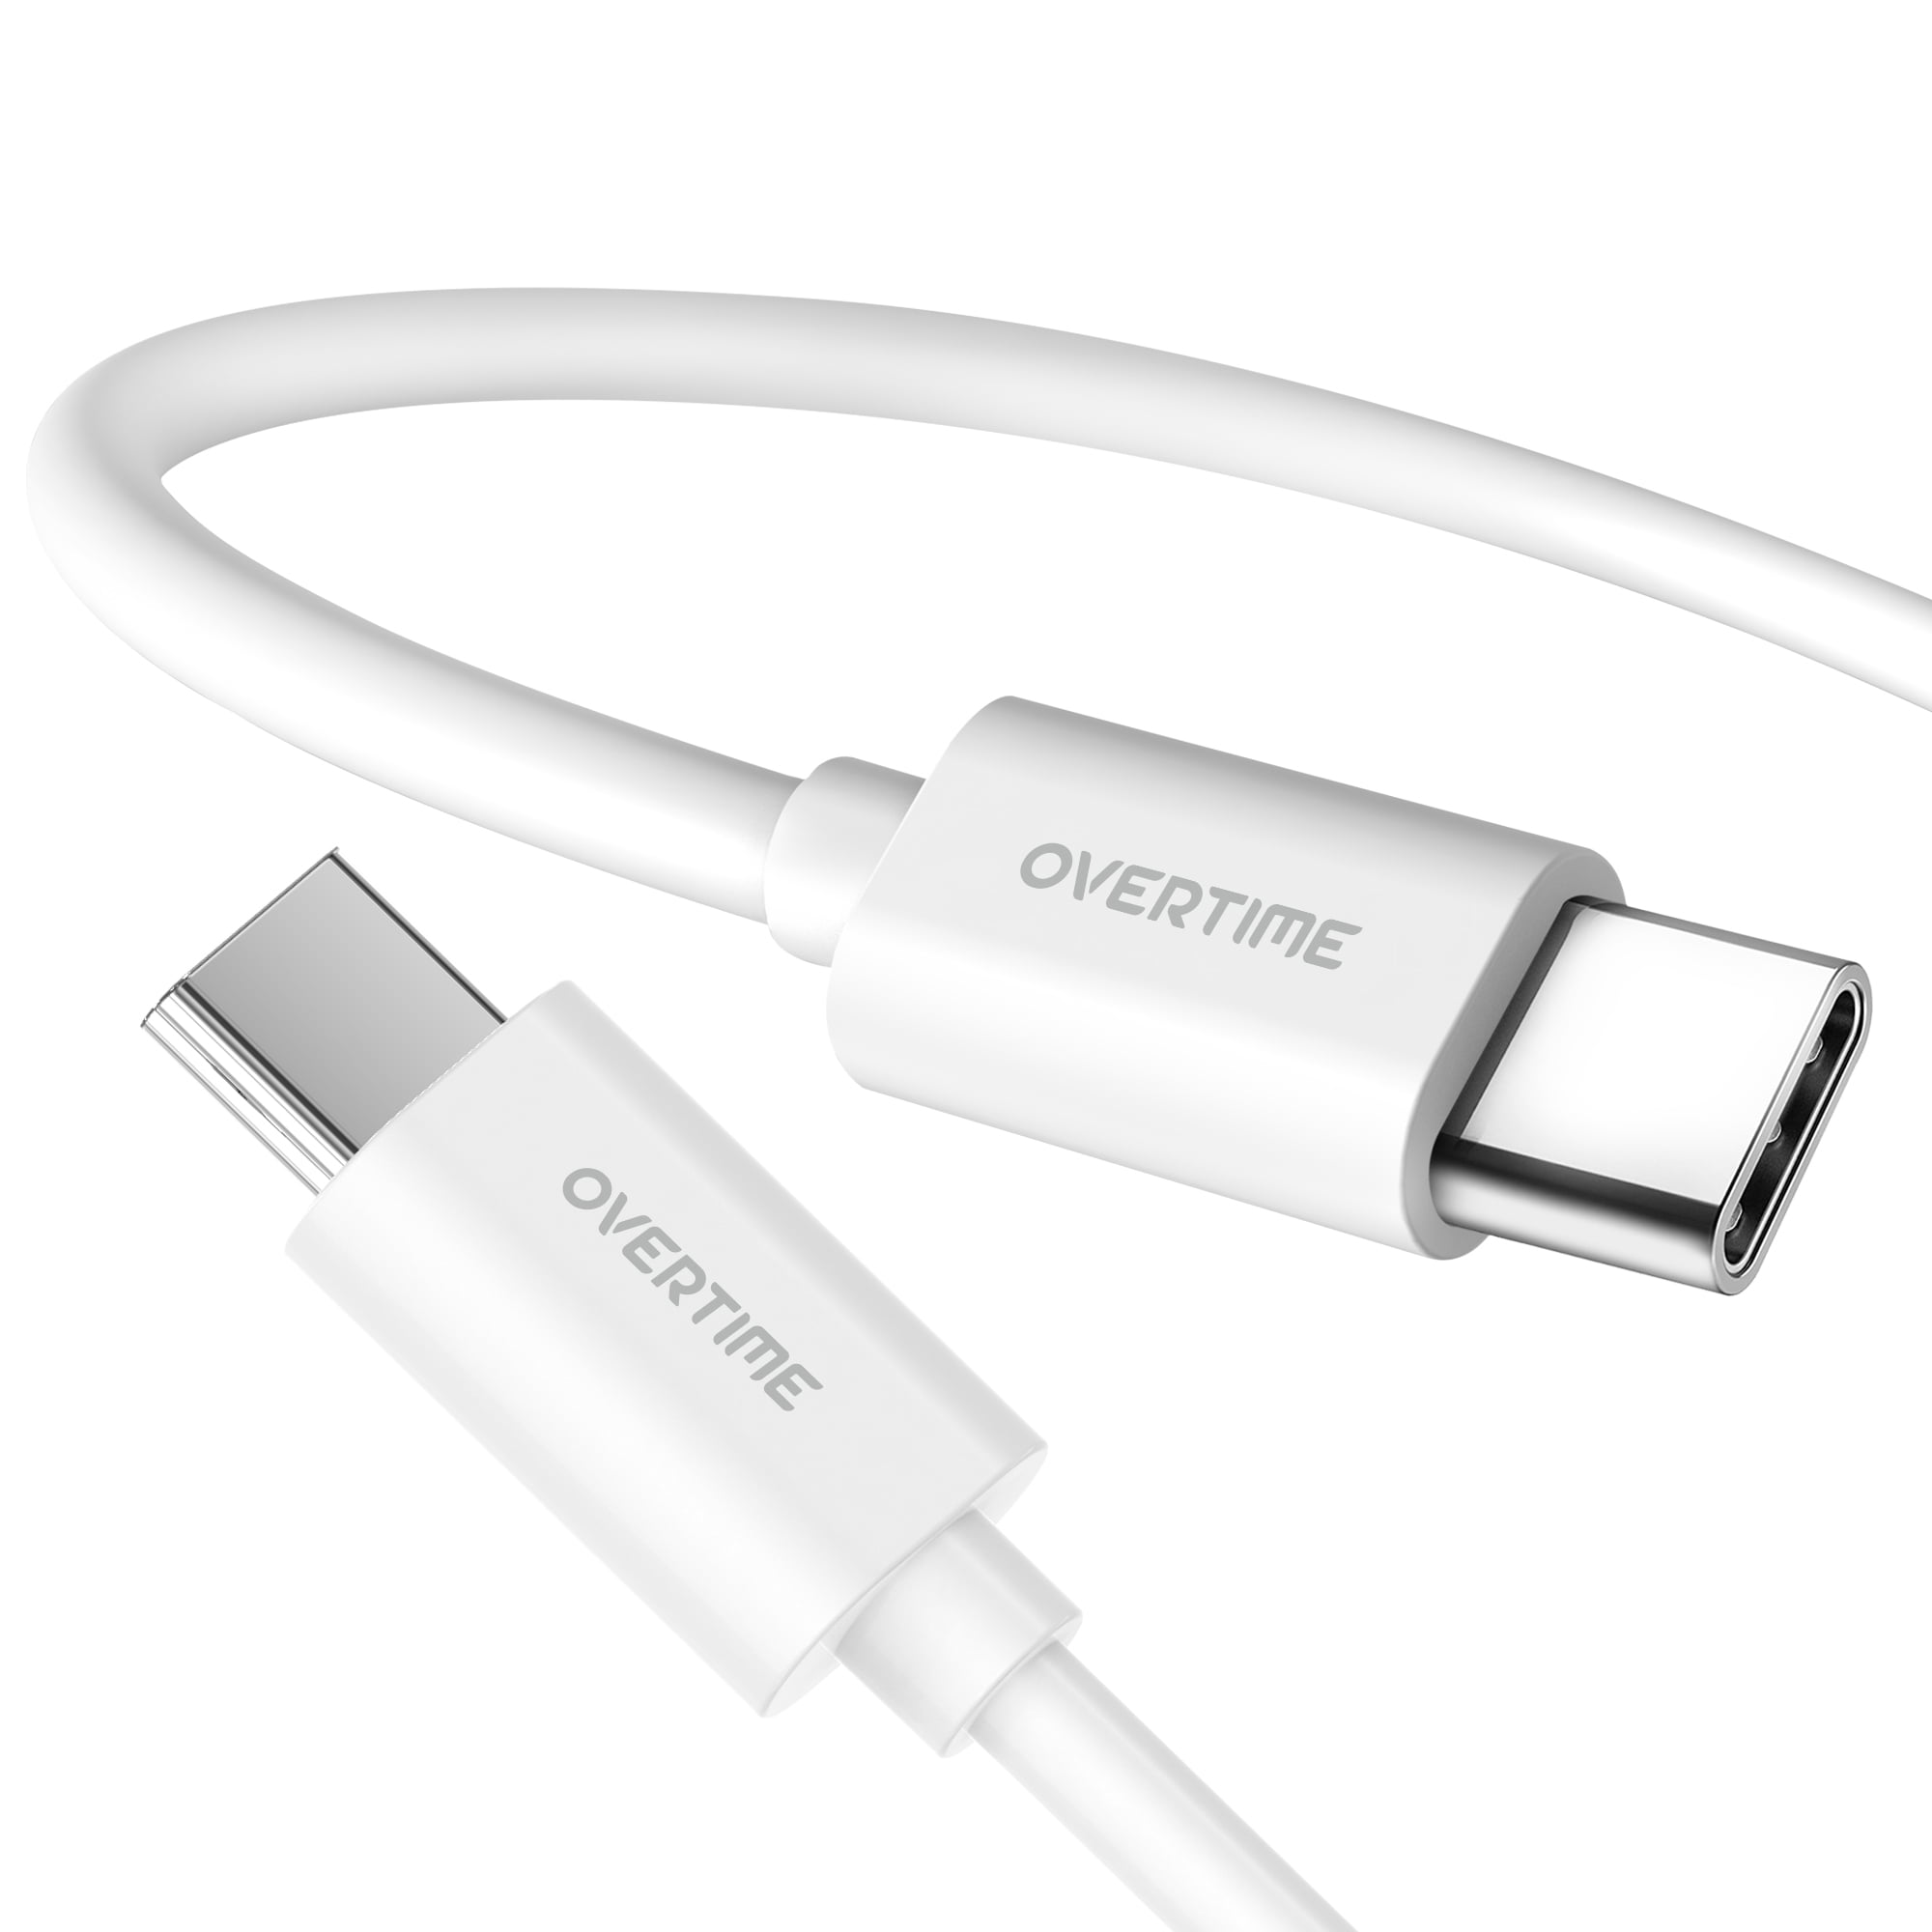 The best Android Auto USB-C cable 